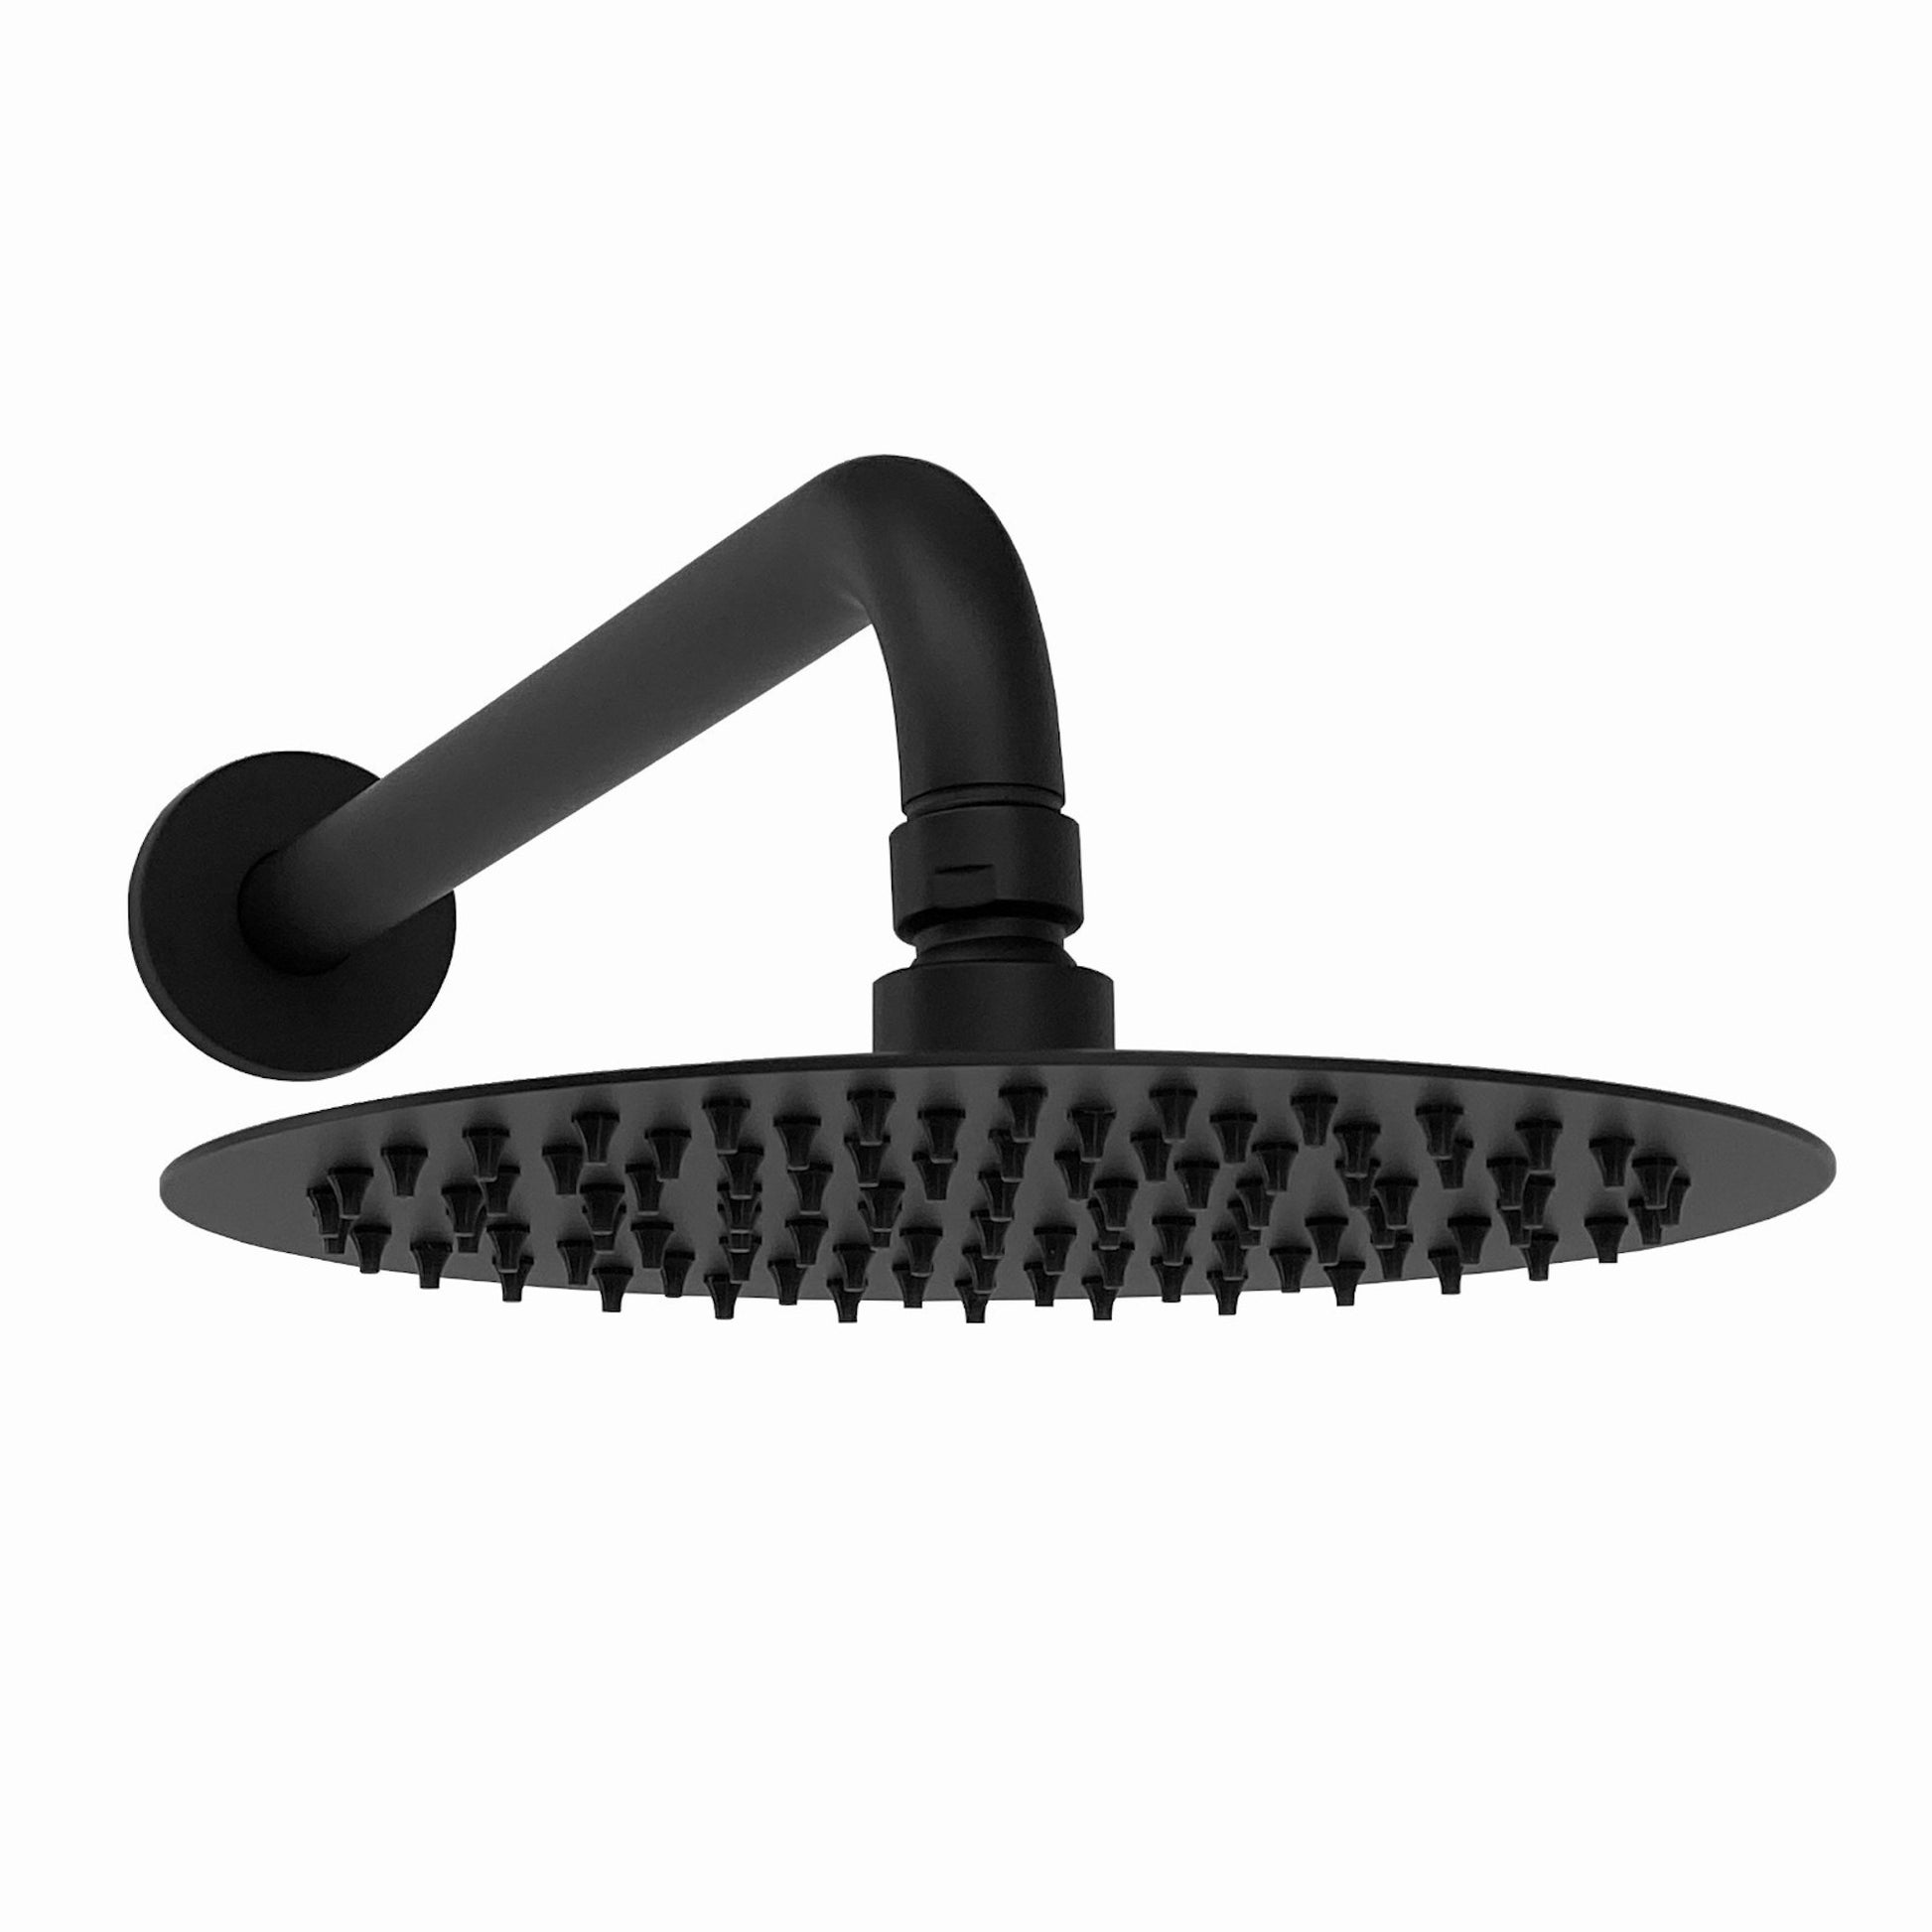 SH0282-03-RA058-01-contemporary-wall-fixed-round-ultra-slim-stainless-steel-shower-head-8-with-shower-arm-matte-black